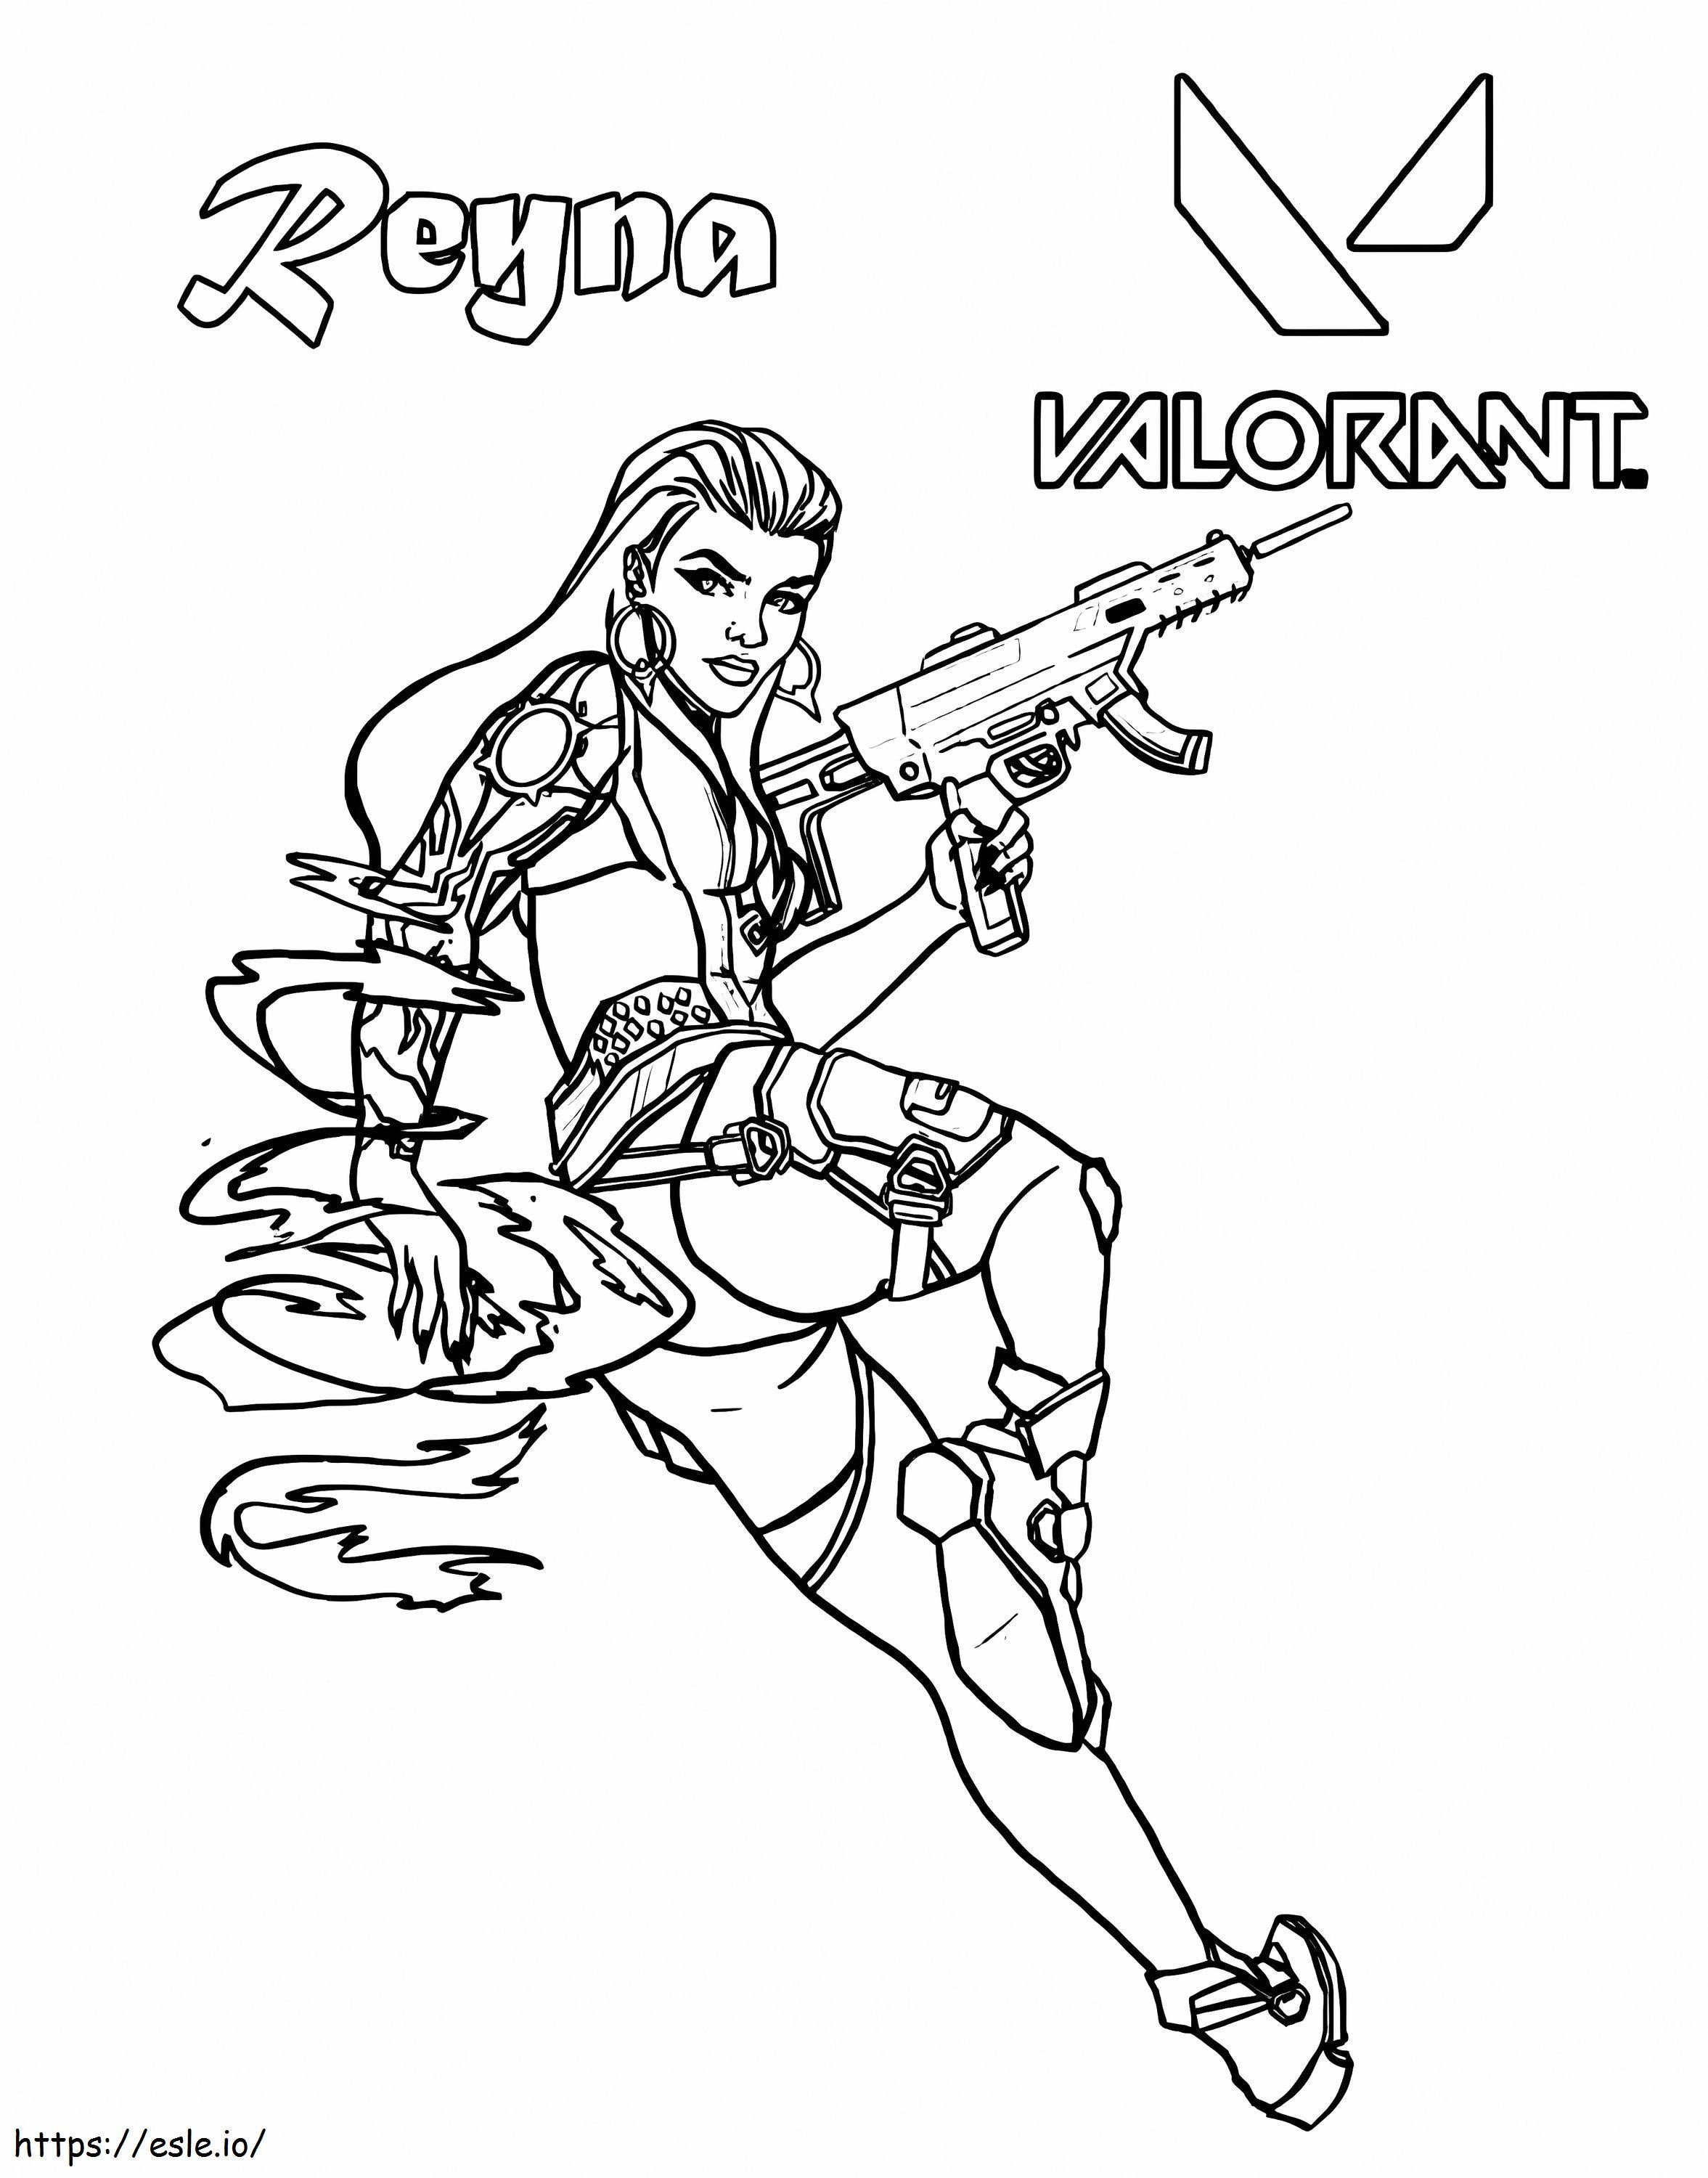 Reyna Valorant coloring page